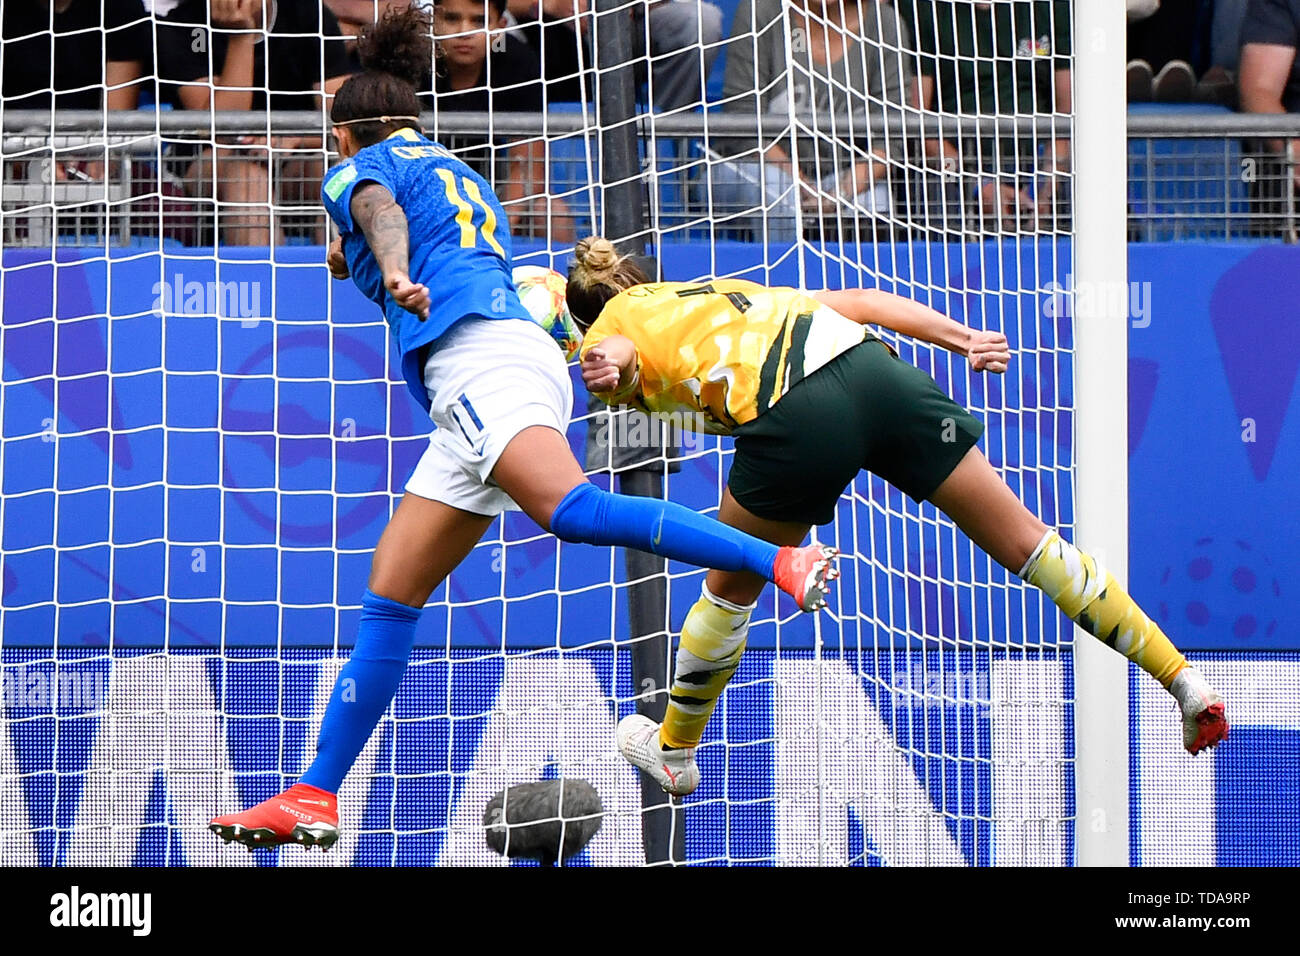 Montpellier. 13th June, 2019. Cristiane (L) of Brazil scores a head shot during the group C match between Brazil and Australia at the 2019 FIFA Women's World Cup in Montpellier, France on June 13, 2019. Credit: Chen Yichen/Xinhua/Alamy Live News Stock Photo